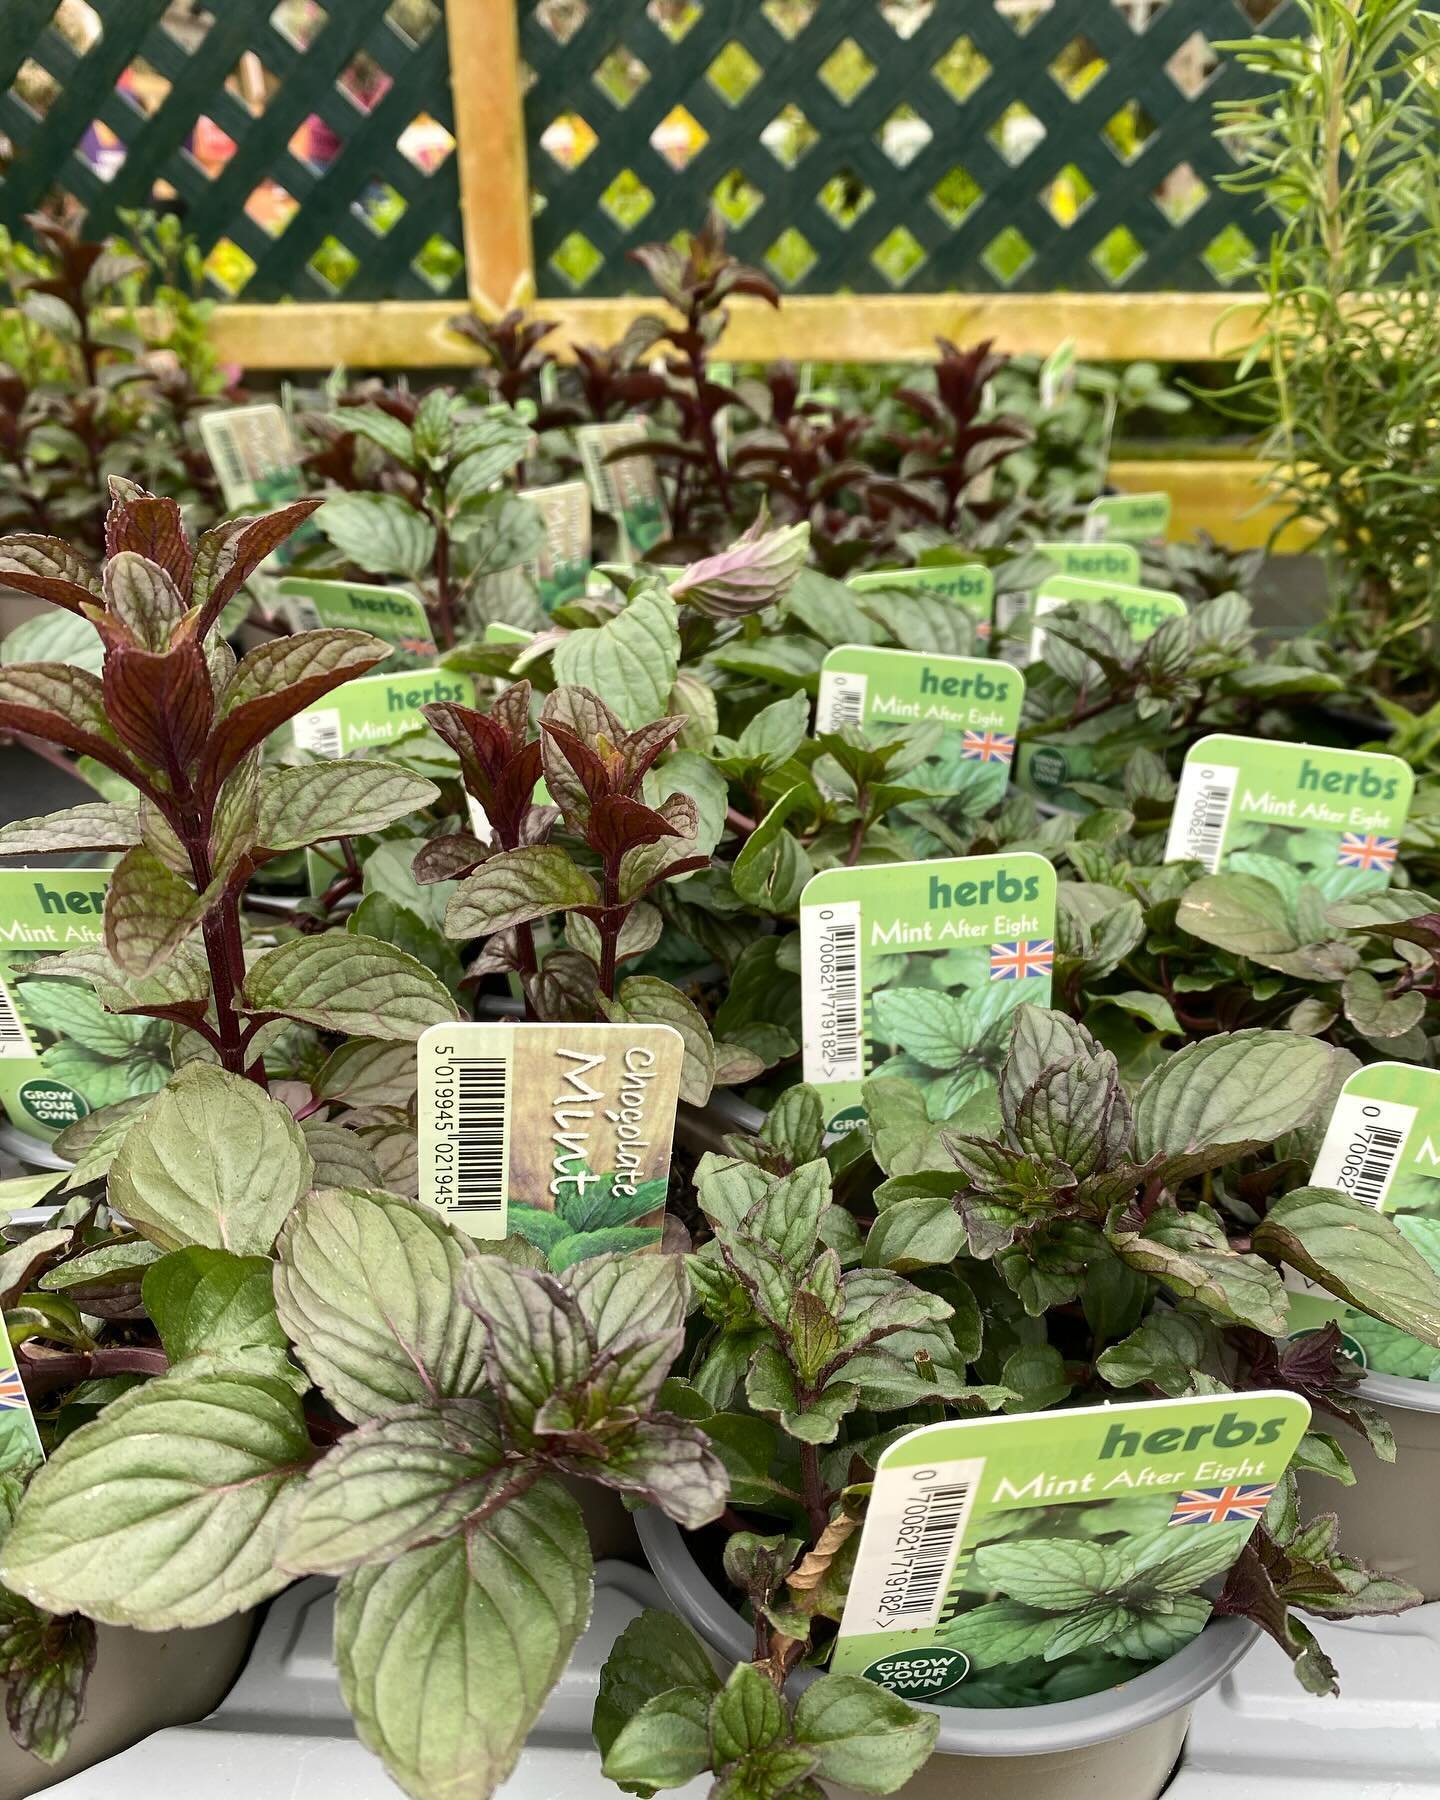 Grow Your Own
Herbs (9cm pot) &pound;2.99 / 4 for &pound;10!
Fresh herbs can help make home cooking taste amazing 🤩 We&rsquo;ve got some wonderful herbs in stock now. 
.
.
.
.
#growyourown #knightsgardencentres #woldingham #chelsham #allotmentgarden